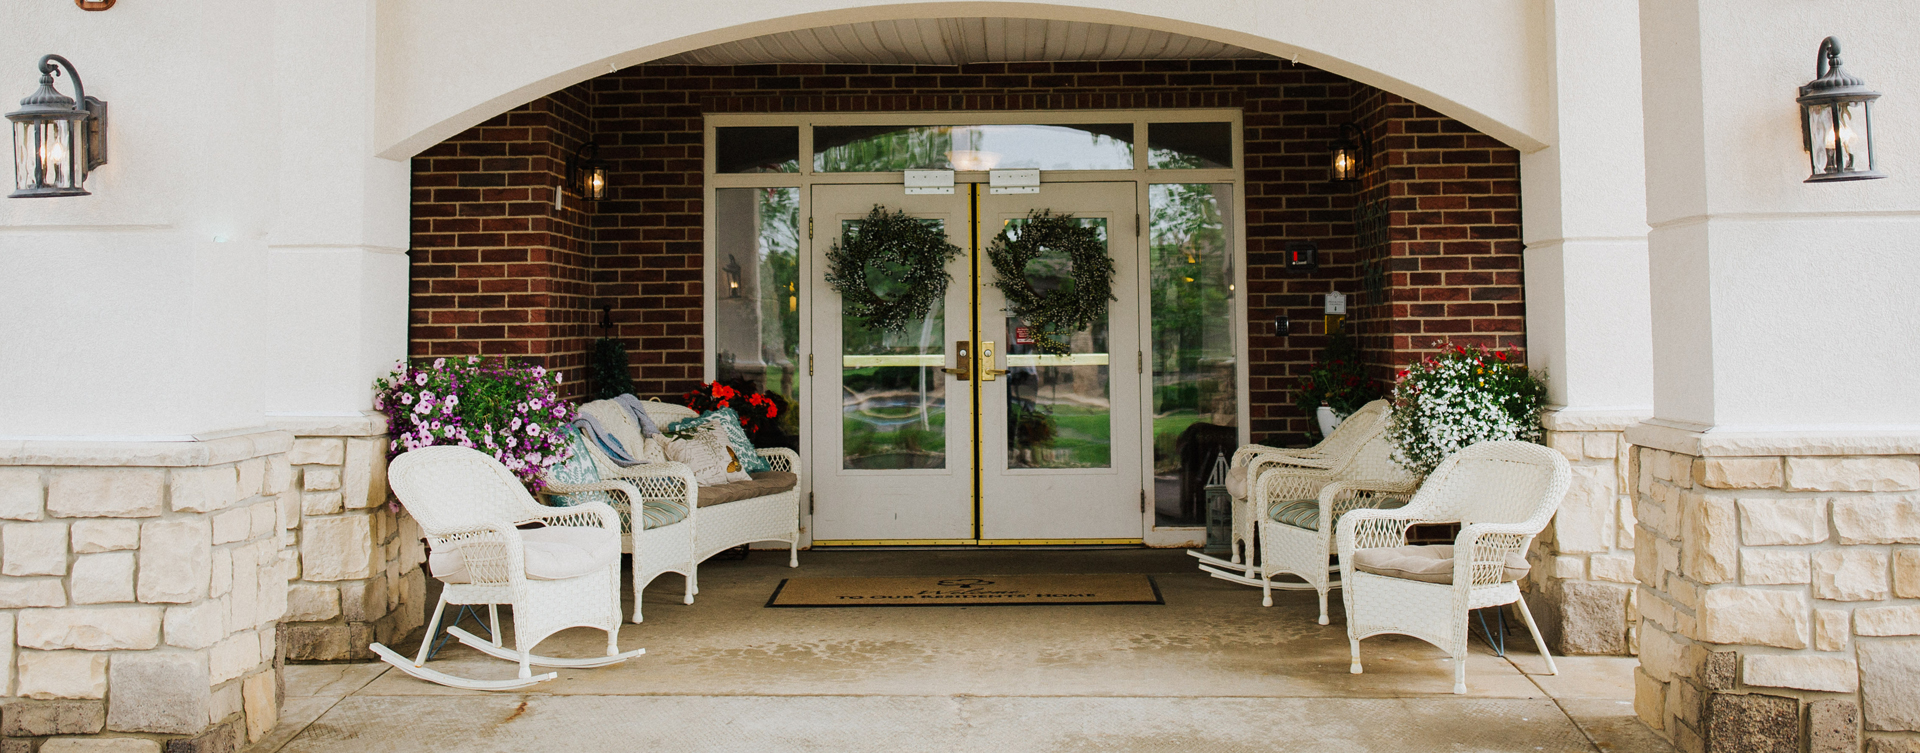 Enjoy conversations with friends on the porch at Bickford of Bourbonnais